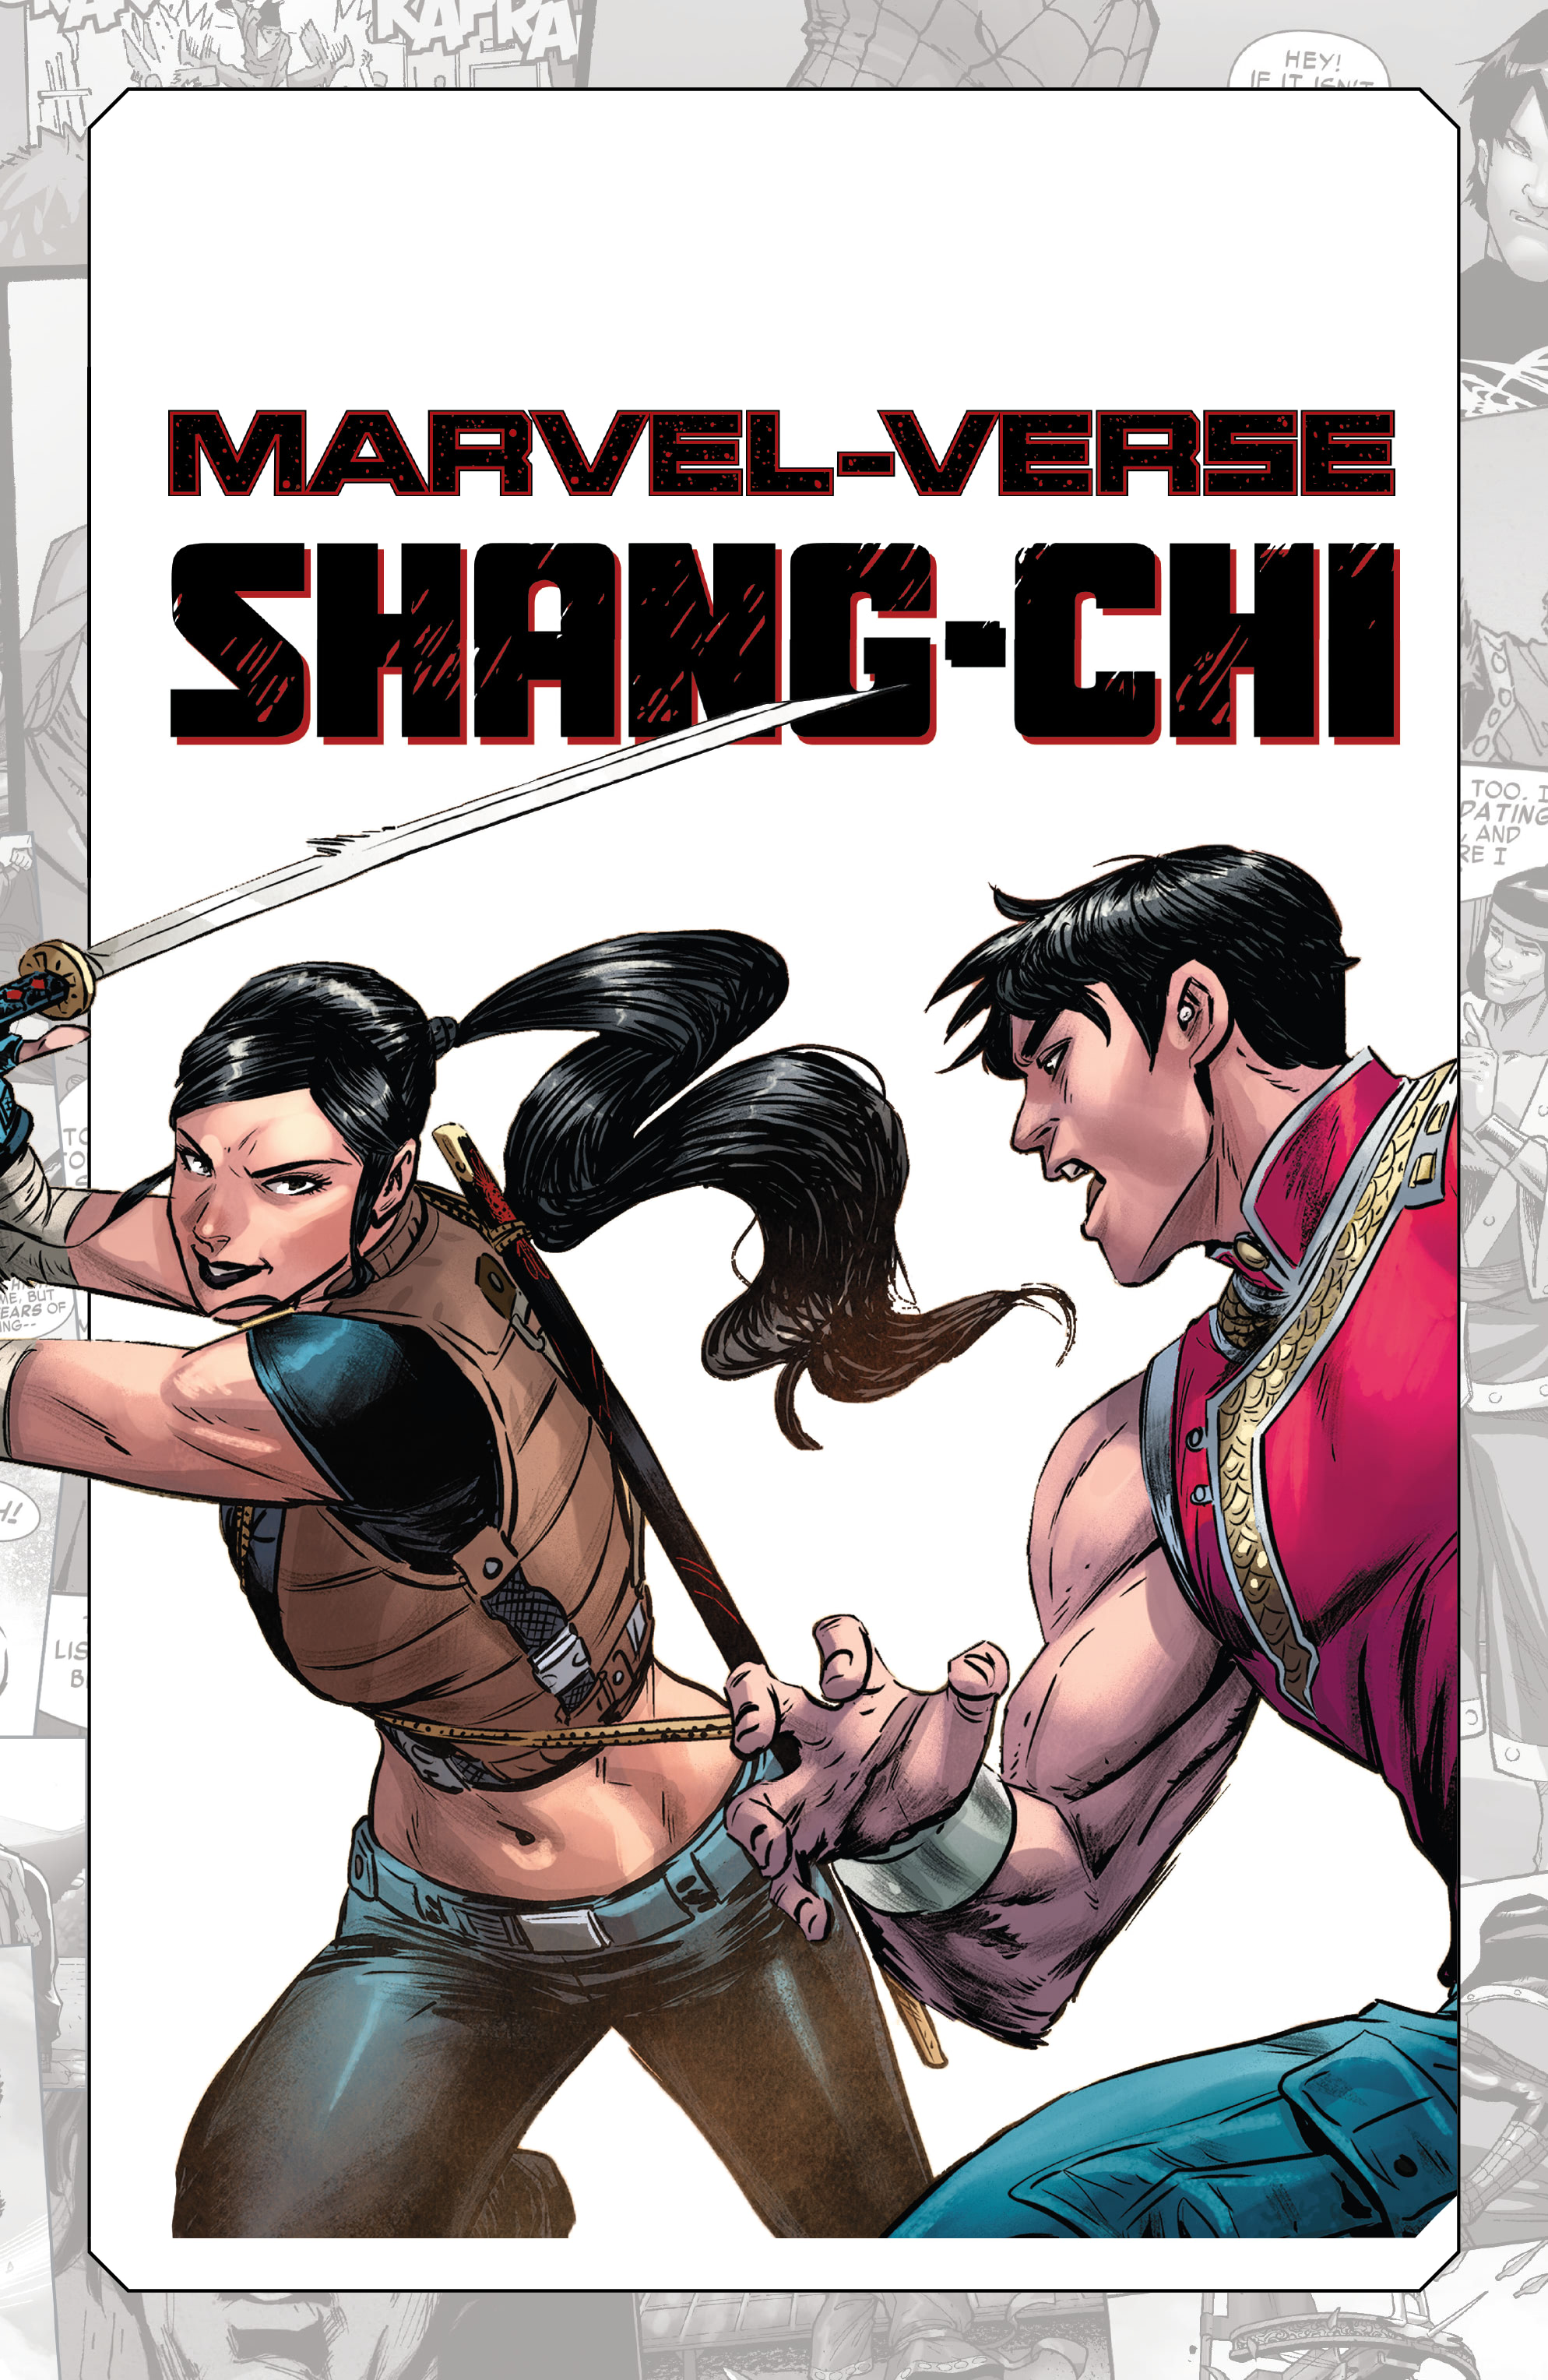 Read online Marvel-Verse: Thanos comic -  Issue #Marvel-Verse (2019) Shang-Chi - 2